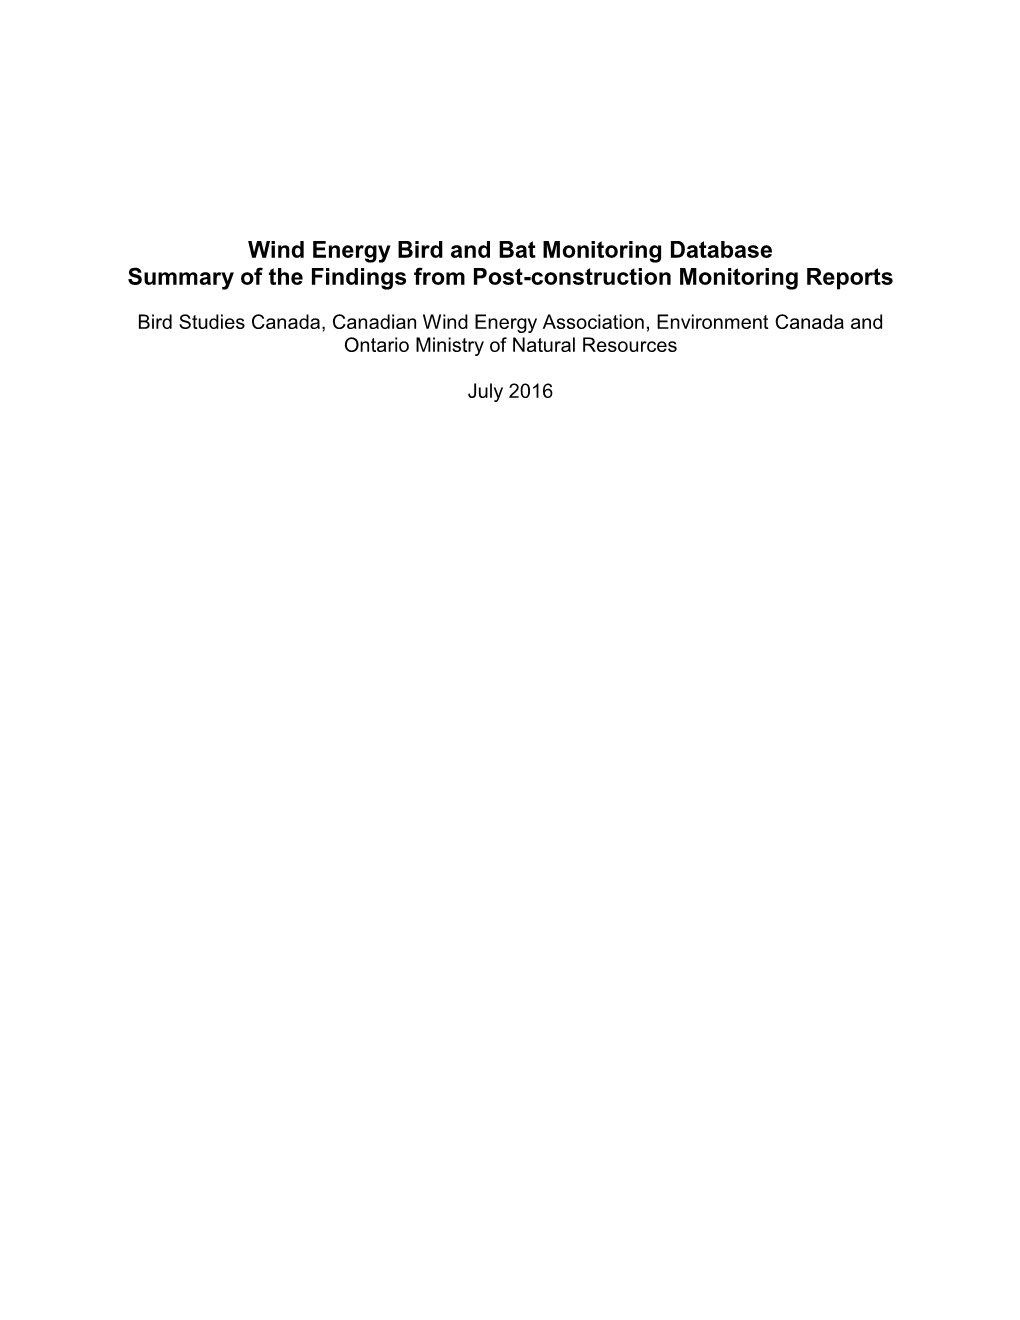 Wind Energy Bird and Bat Monitoring Database Summary of the Findings from Post-Construction Monitoring Reports